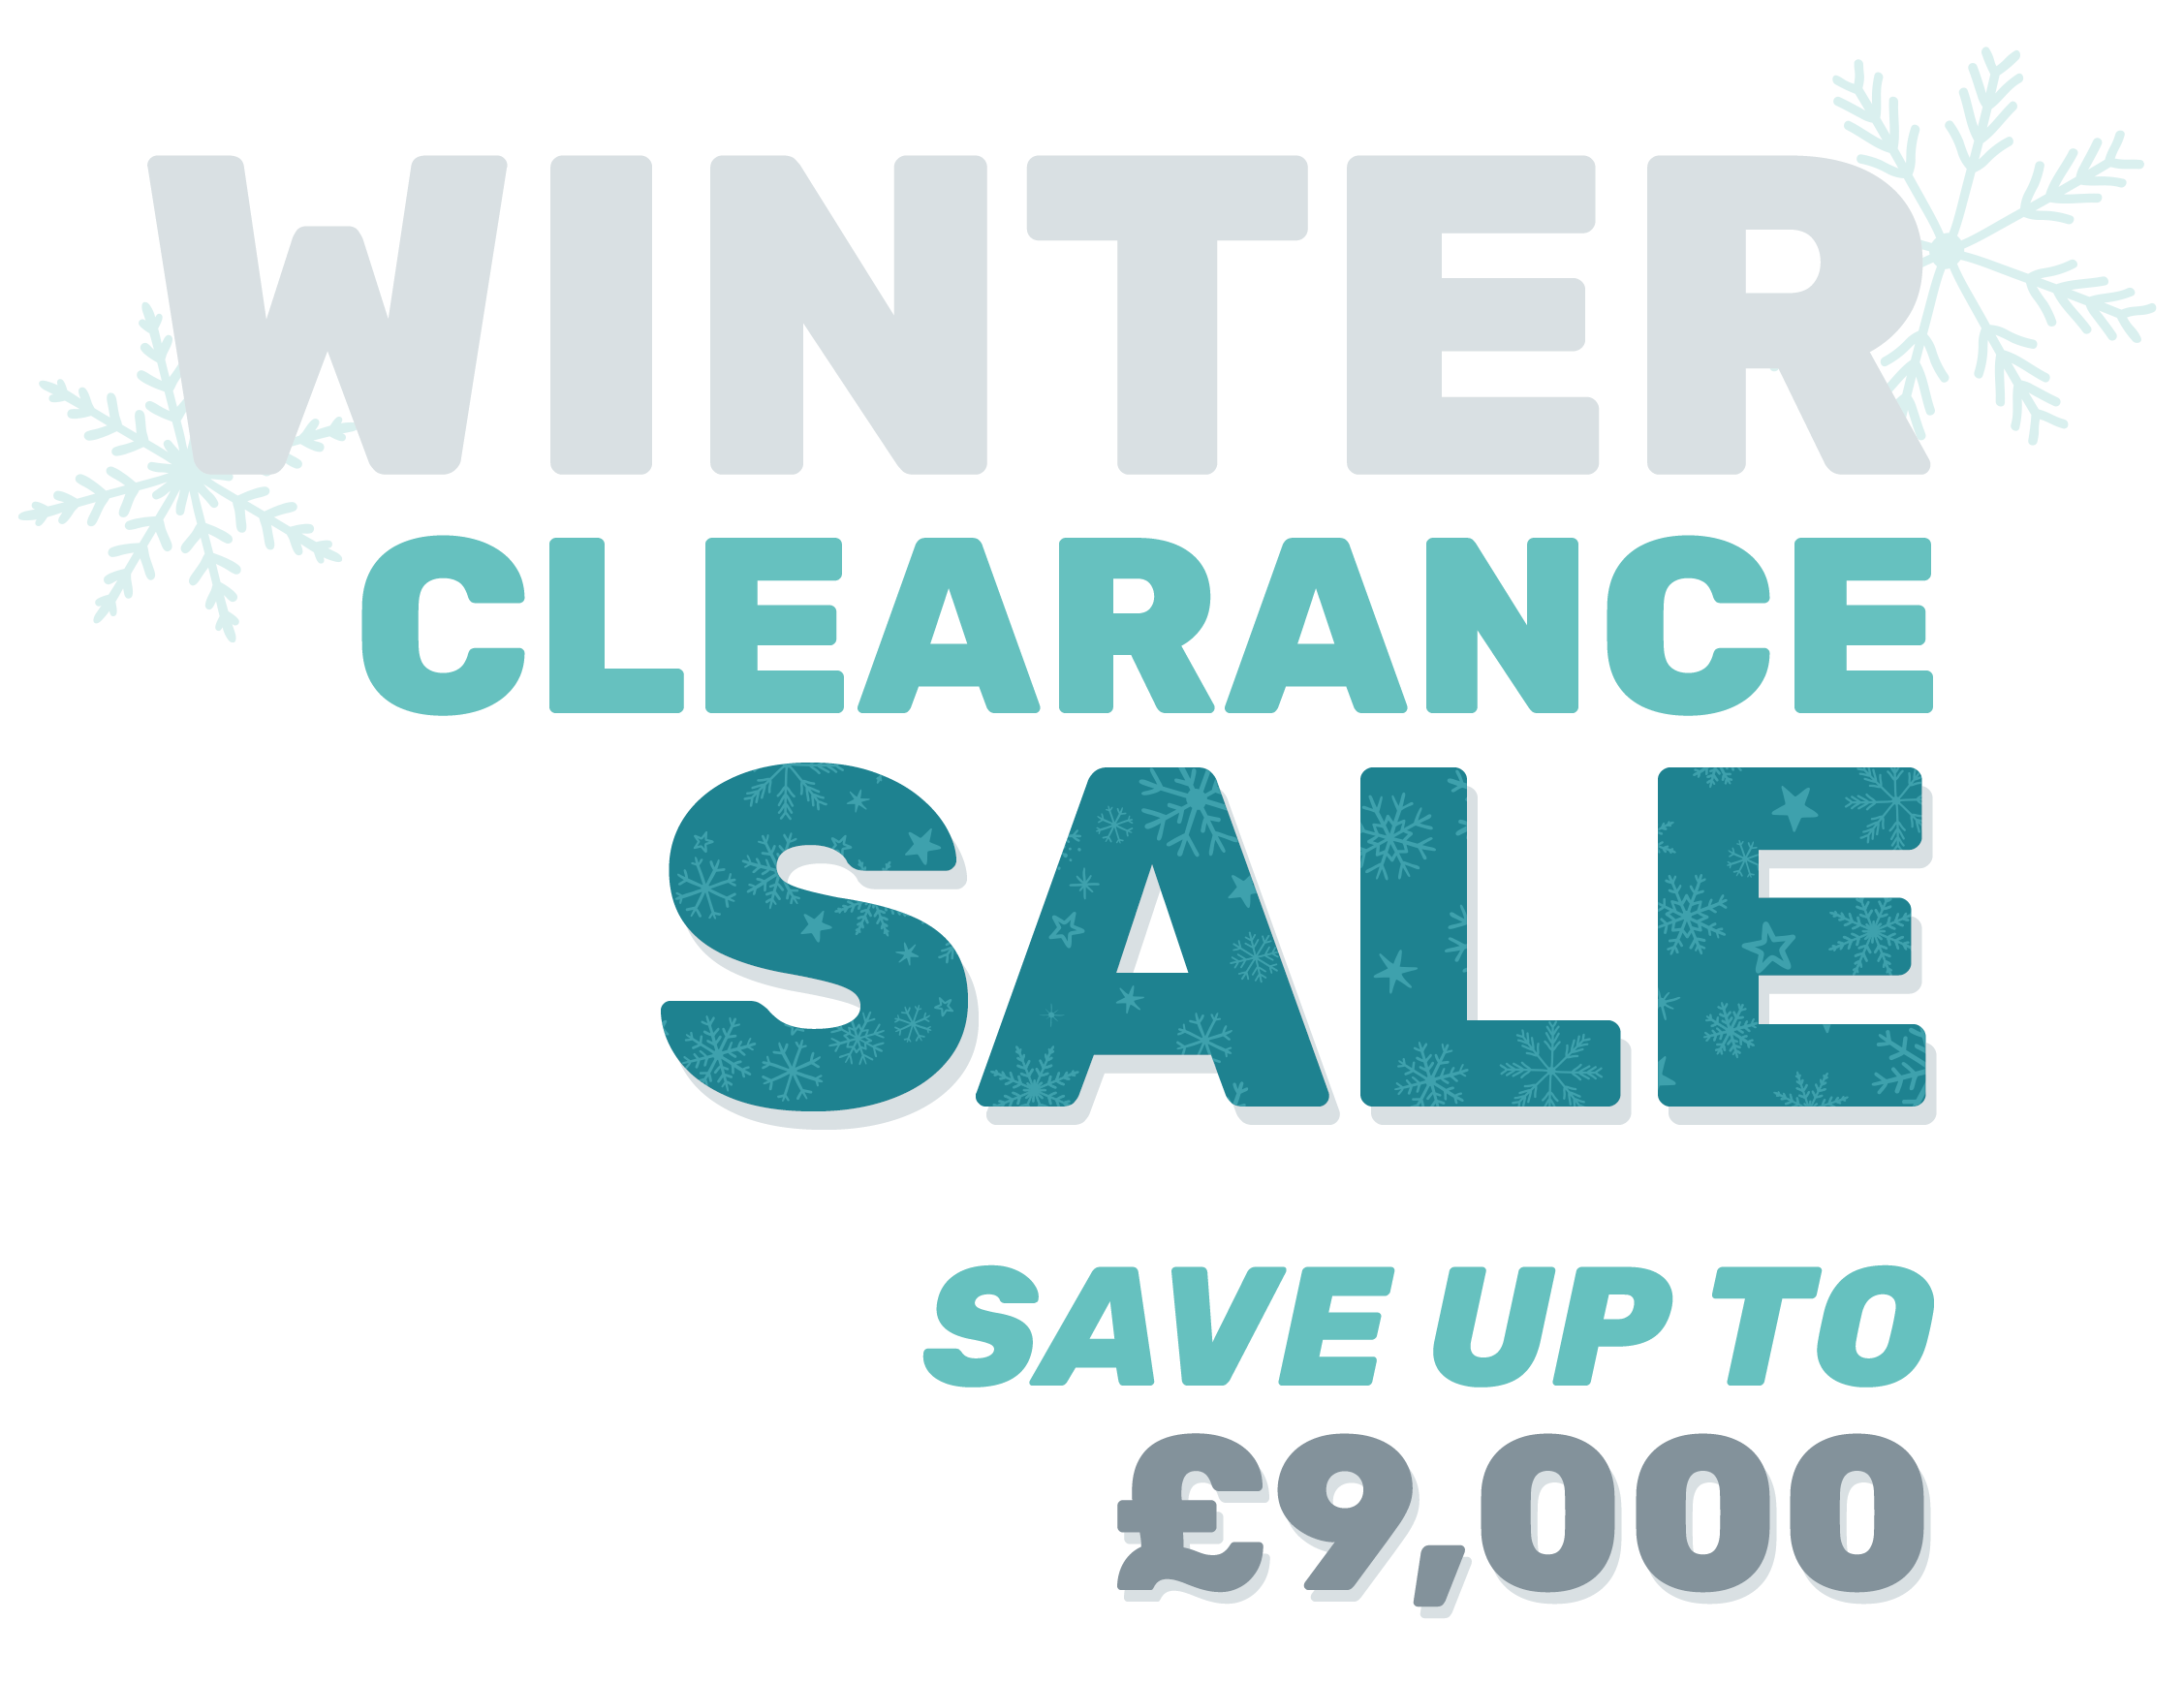 Winter Clearance Sale Save up to £9,000!